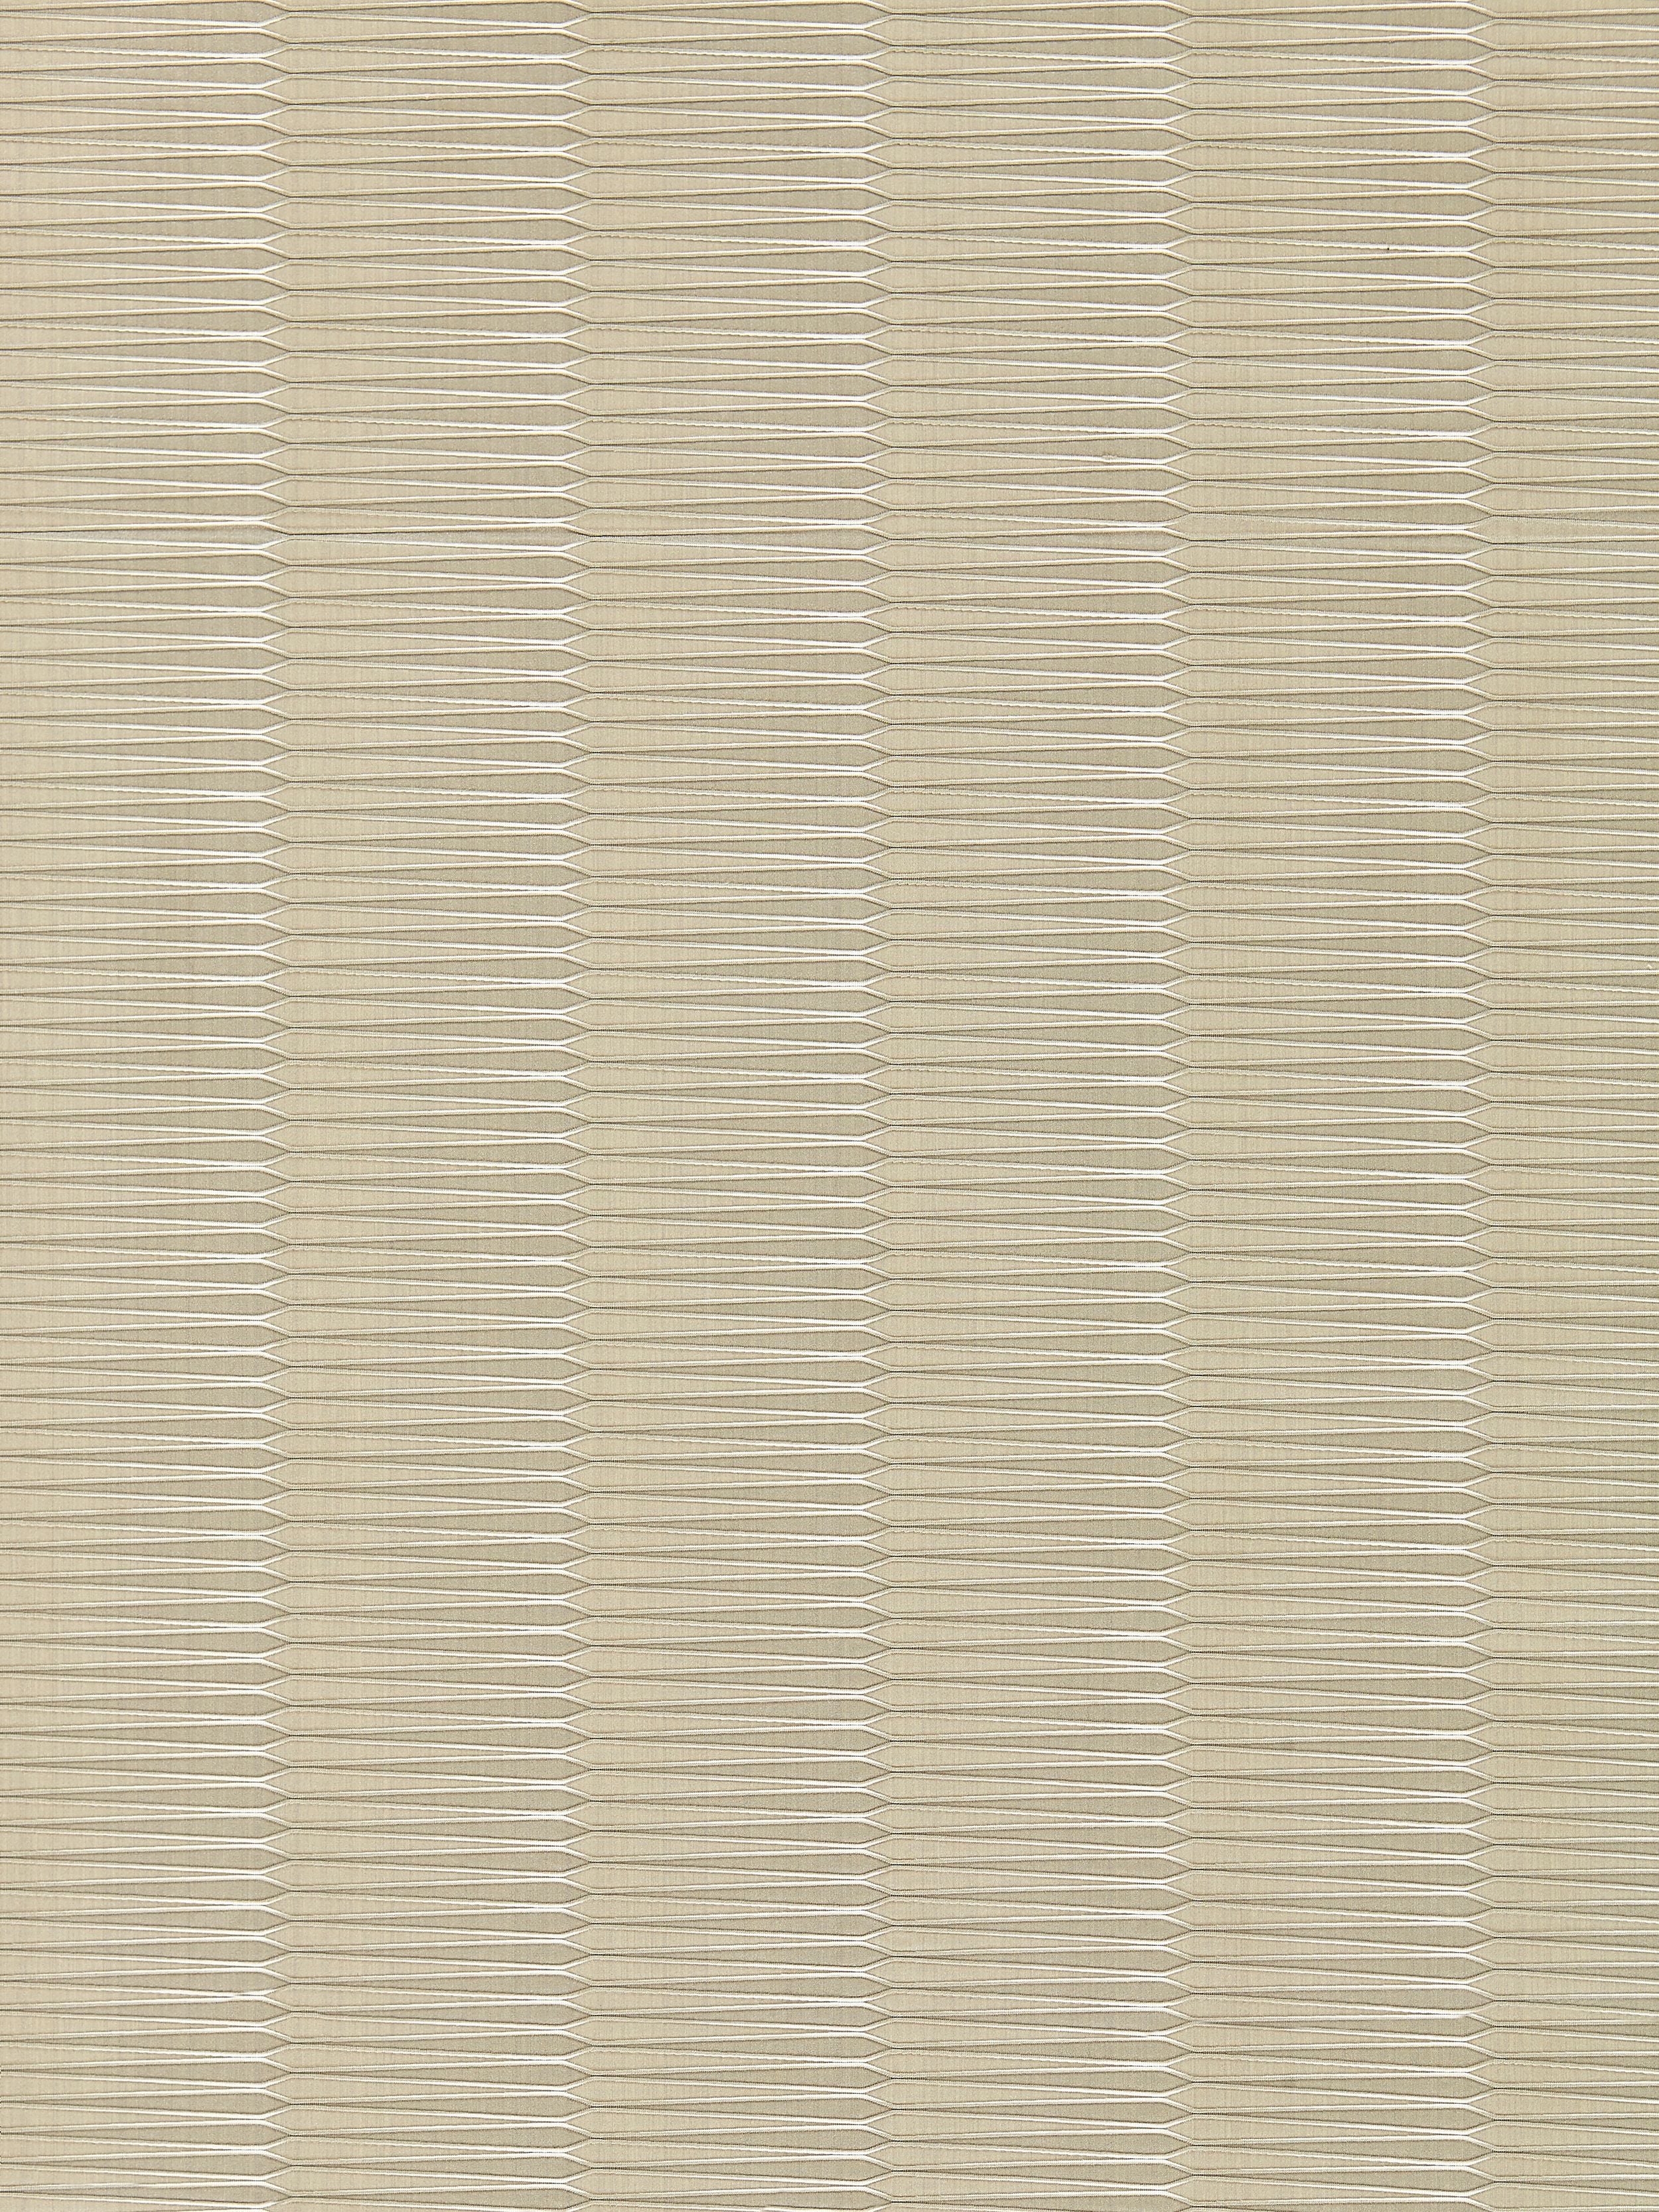 Wavelength fabric in putty color - pattern number SC 000127141 - by Scalamandre in the Scalamandre Fabrics Book 1 collection